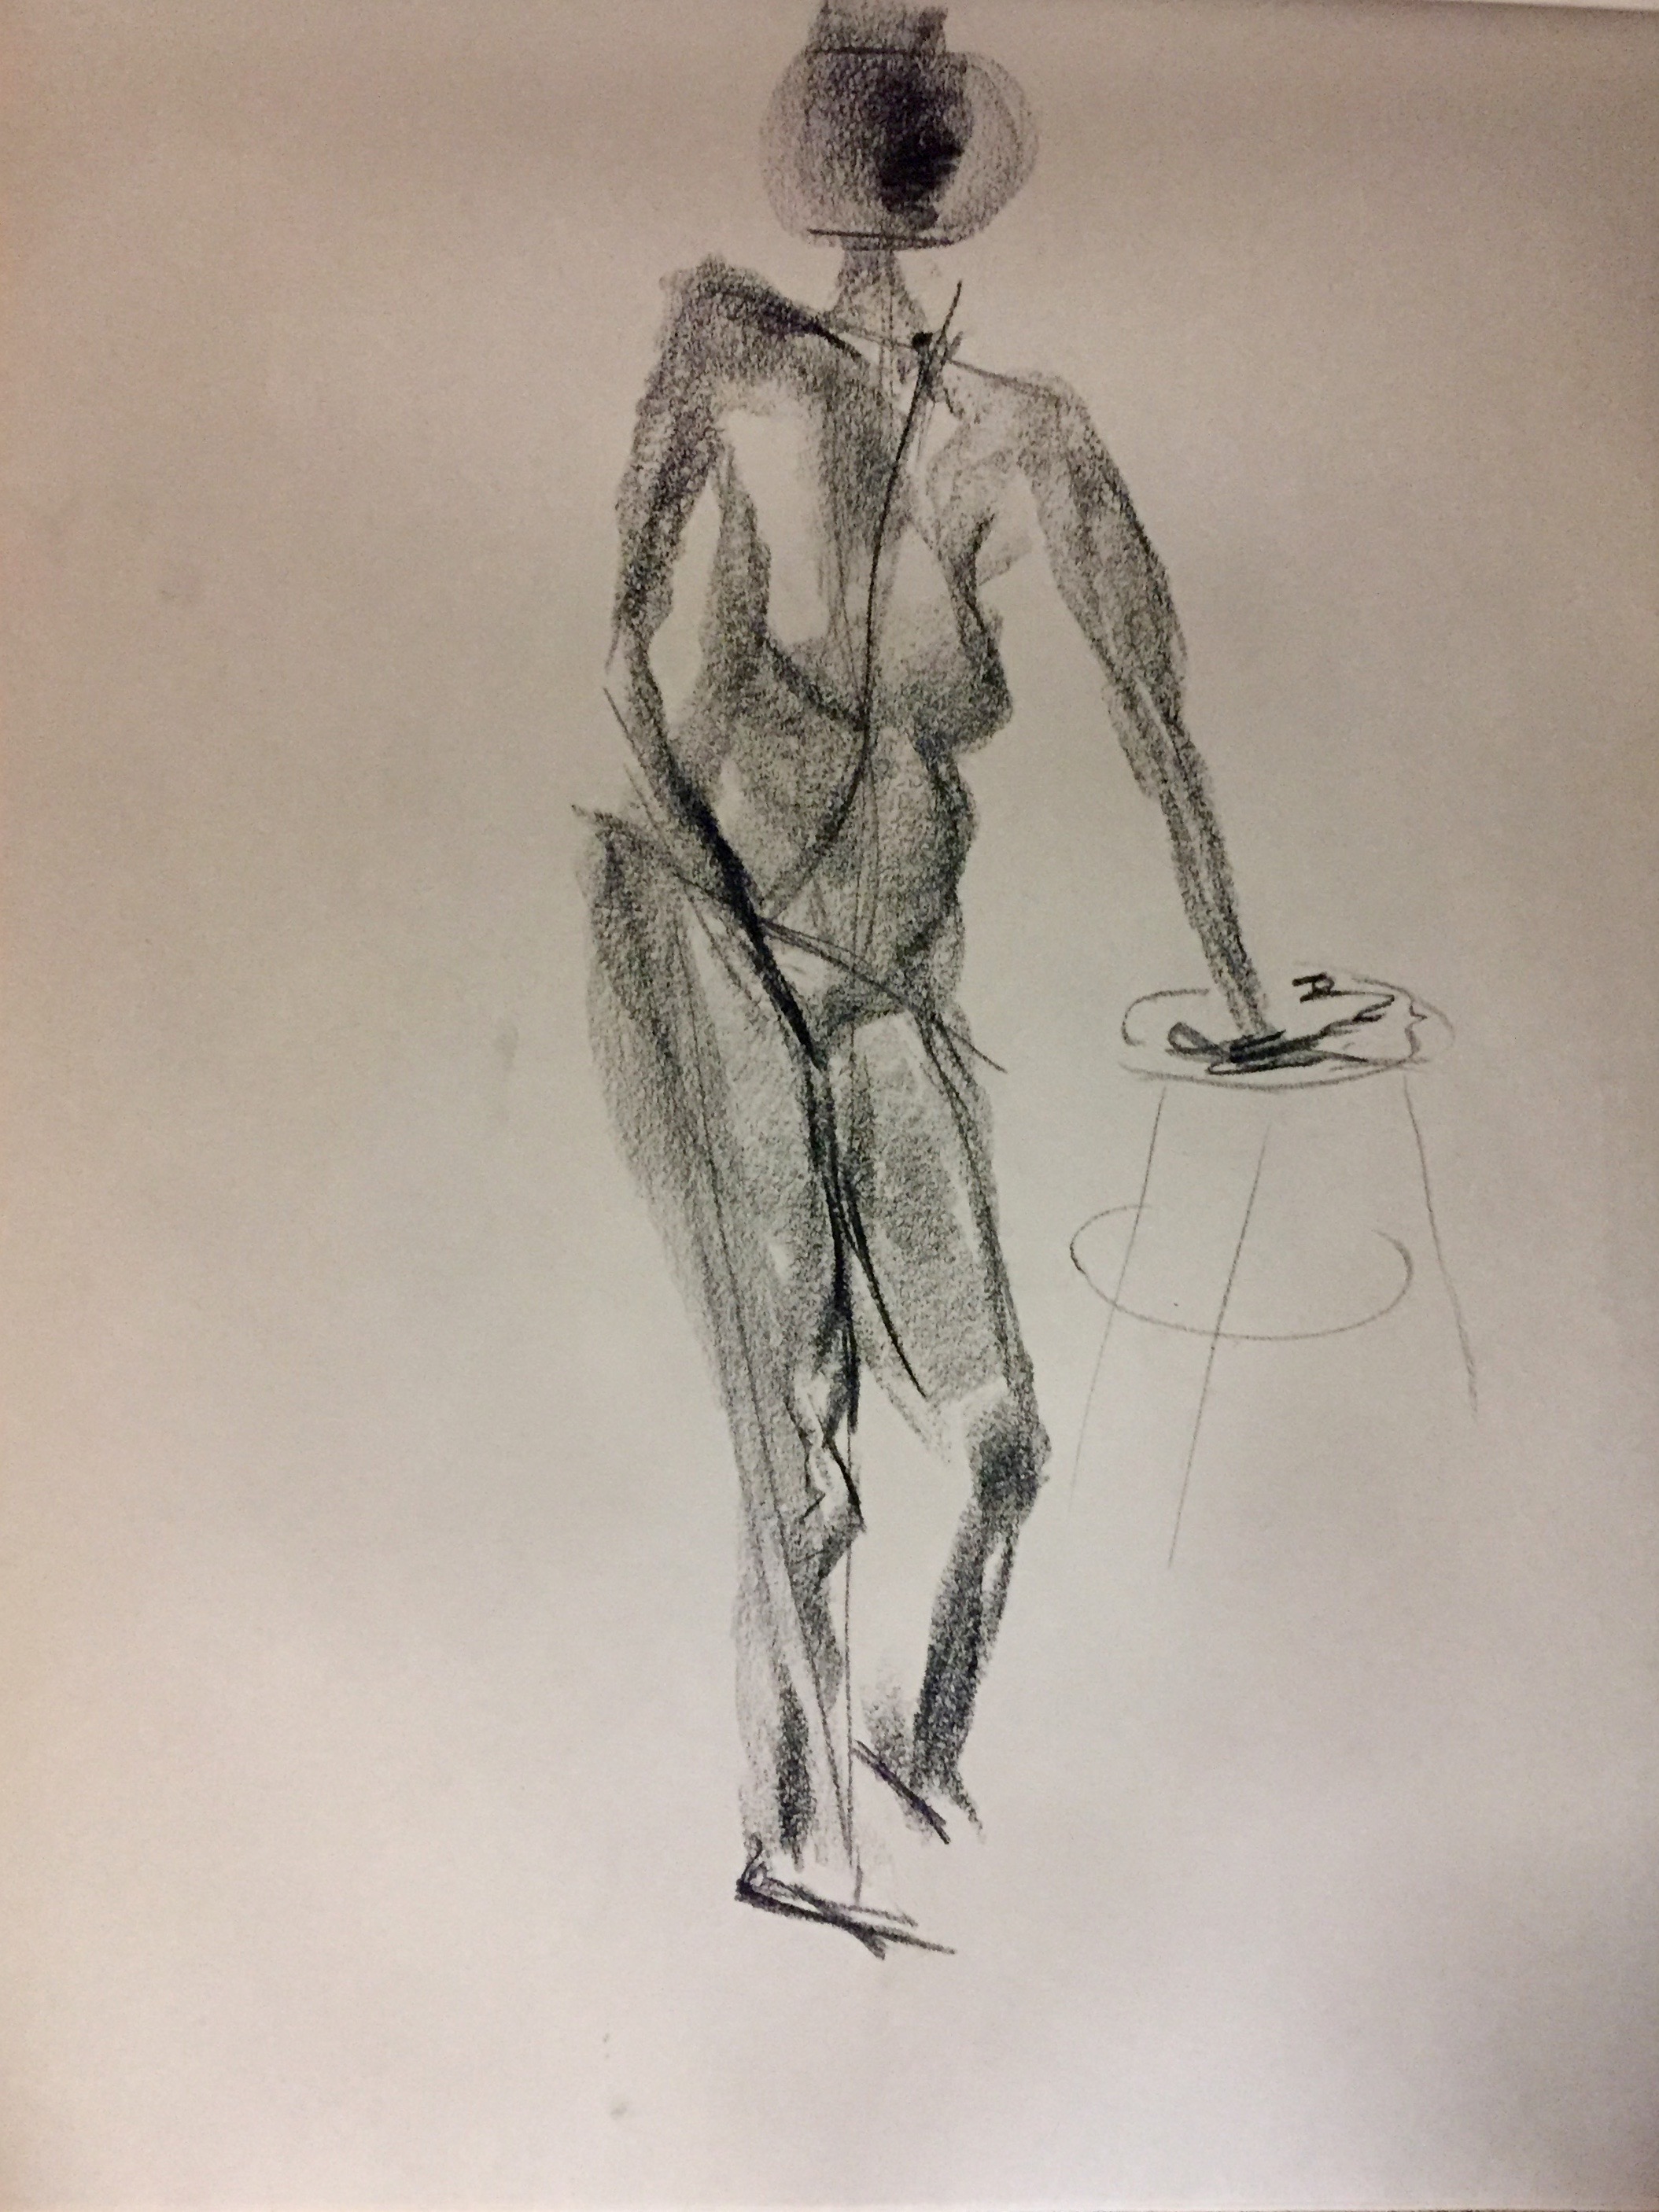 Drawings from the Model using shading